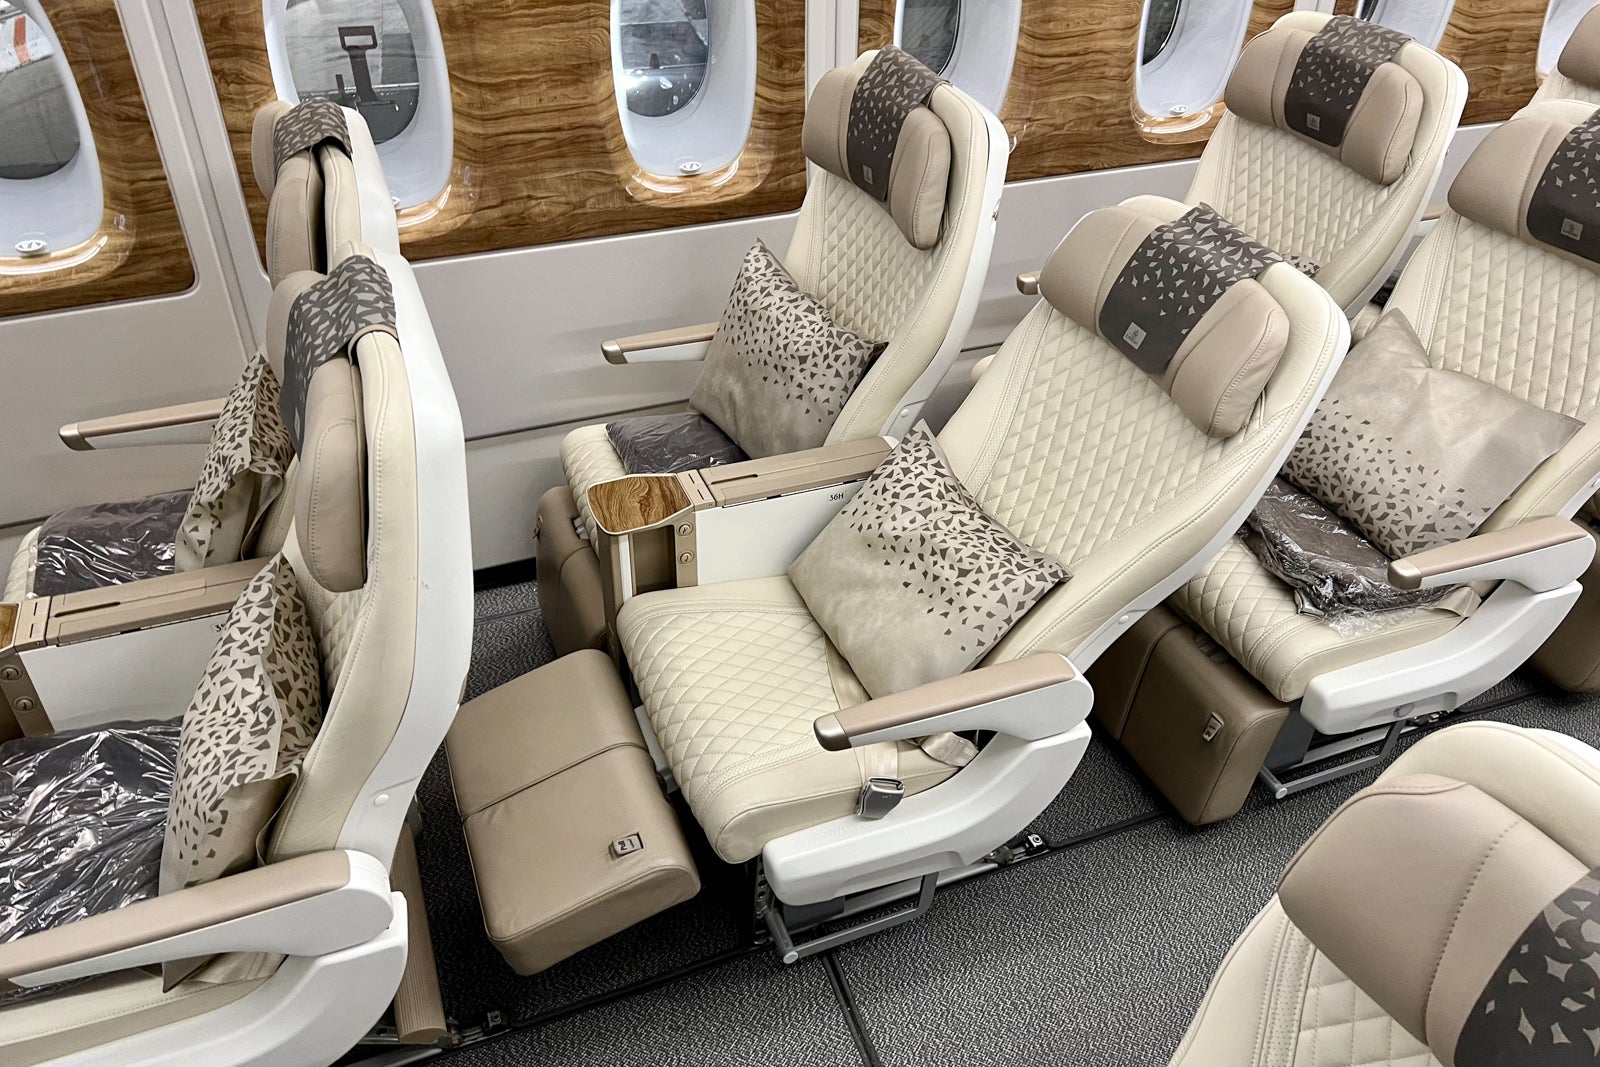 14 things that caught me off guard in Emirates’ new premium economy